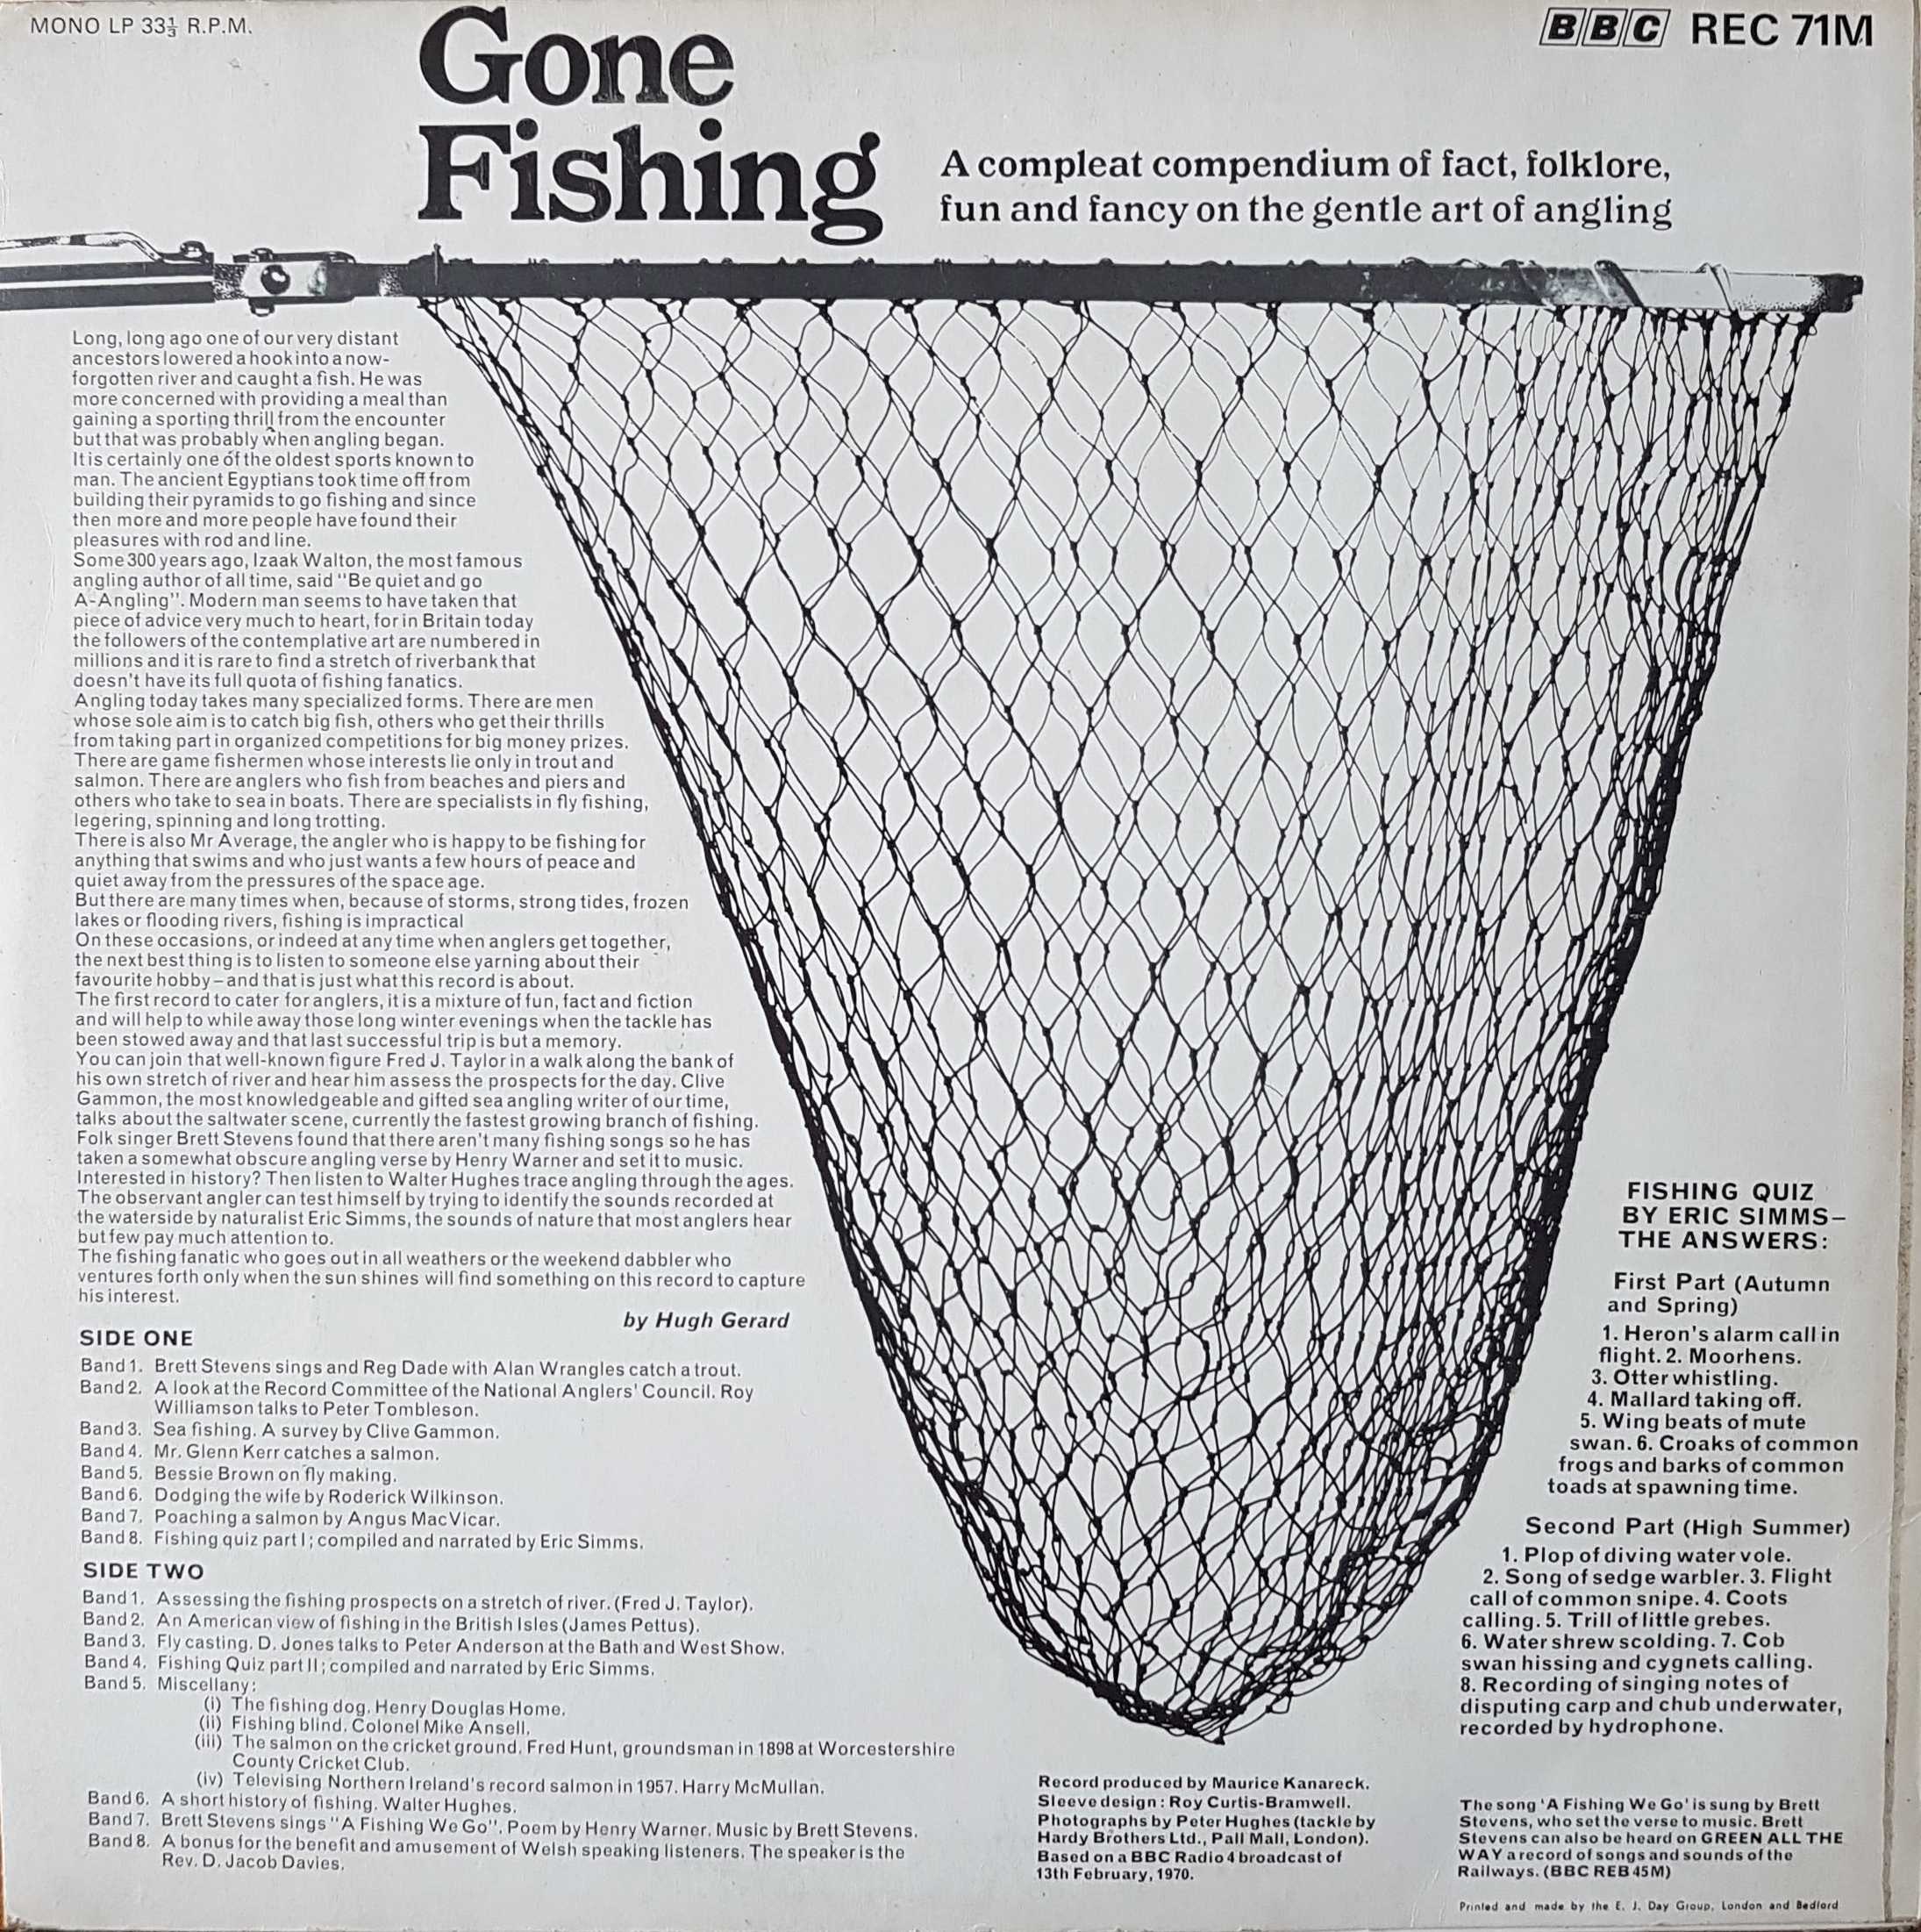 Picture of REC 71 Gone fishing by artist Various from the BBC records and Tapes library